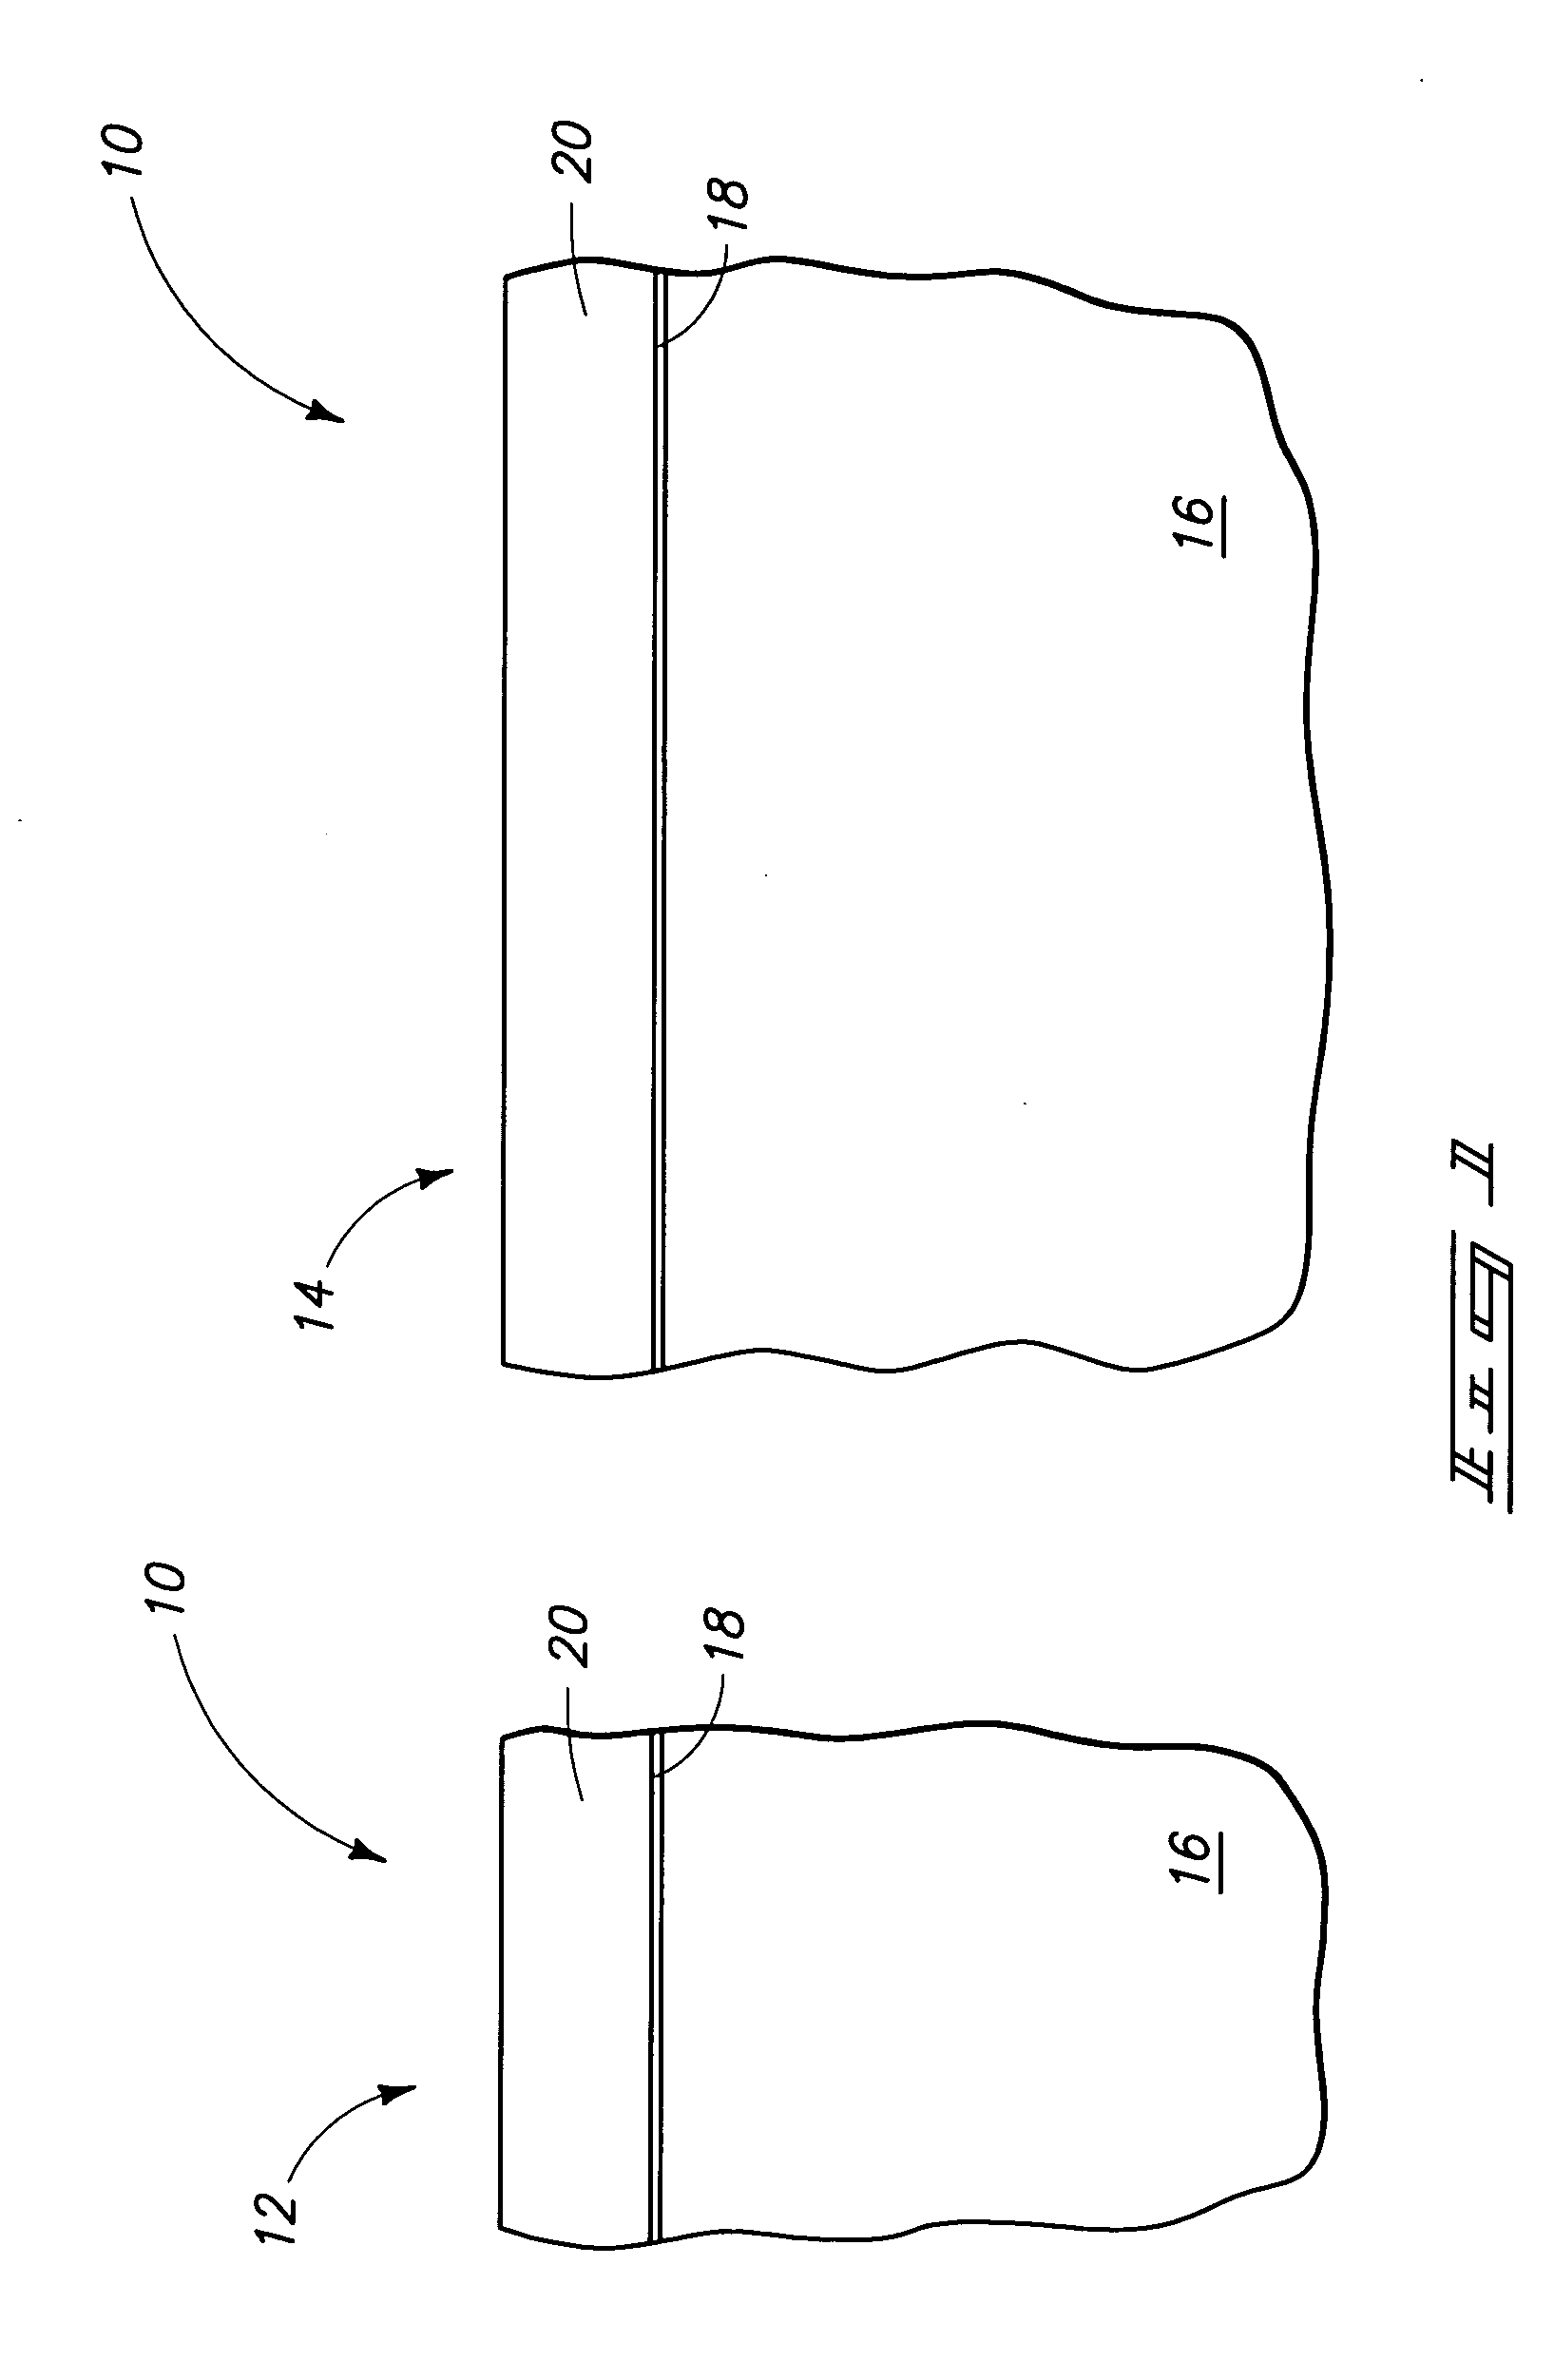 Methods of forming trench isolation in the fabrication of integrated circuitry and methods of fabricating integrated circuitry